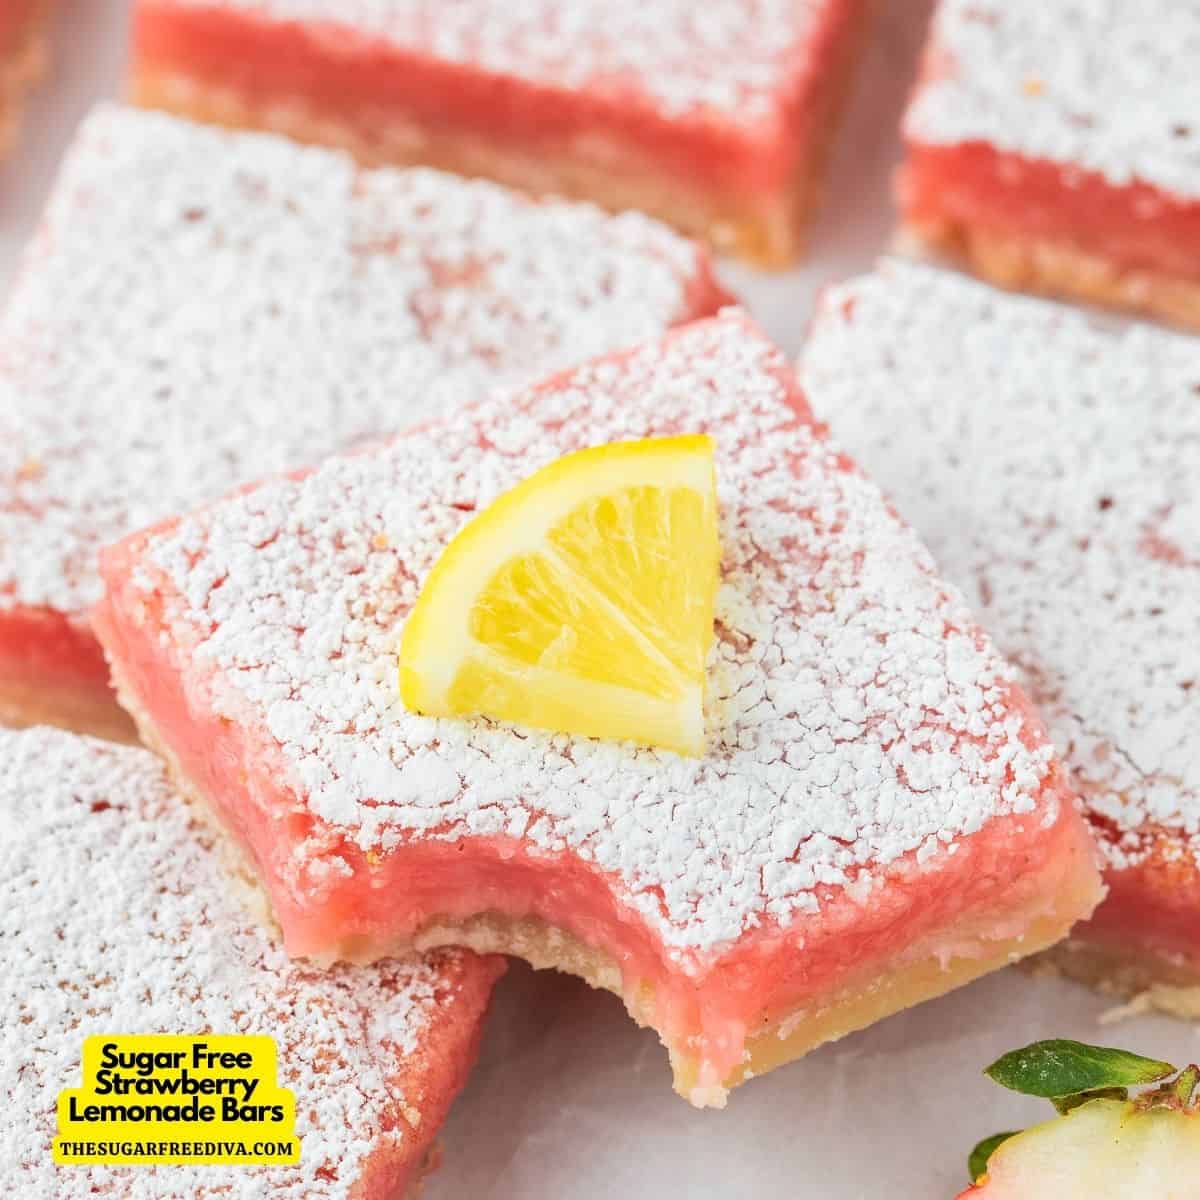 Sugar Free Strawberry Lemonade Bars, a simple and delicious layered dessert bar recipe made with fresh strawberries and no added sugar.